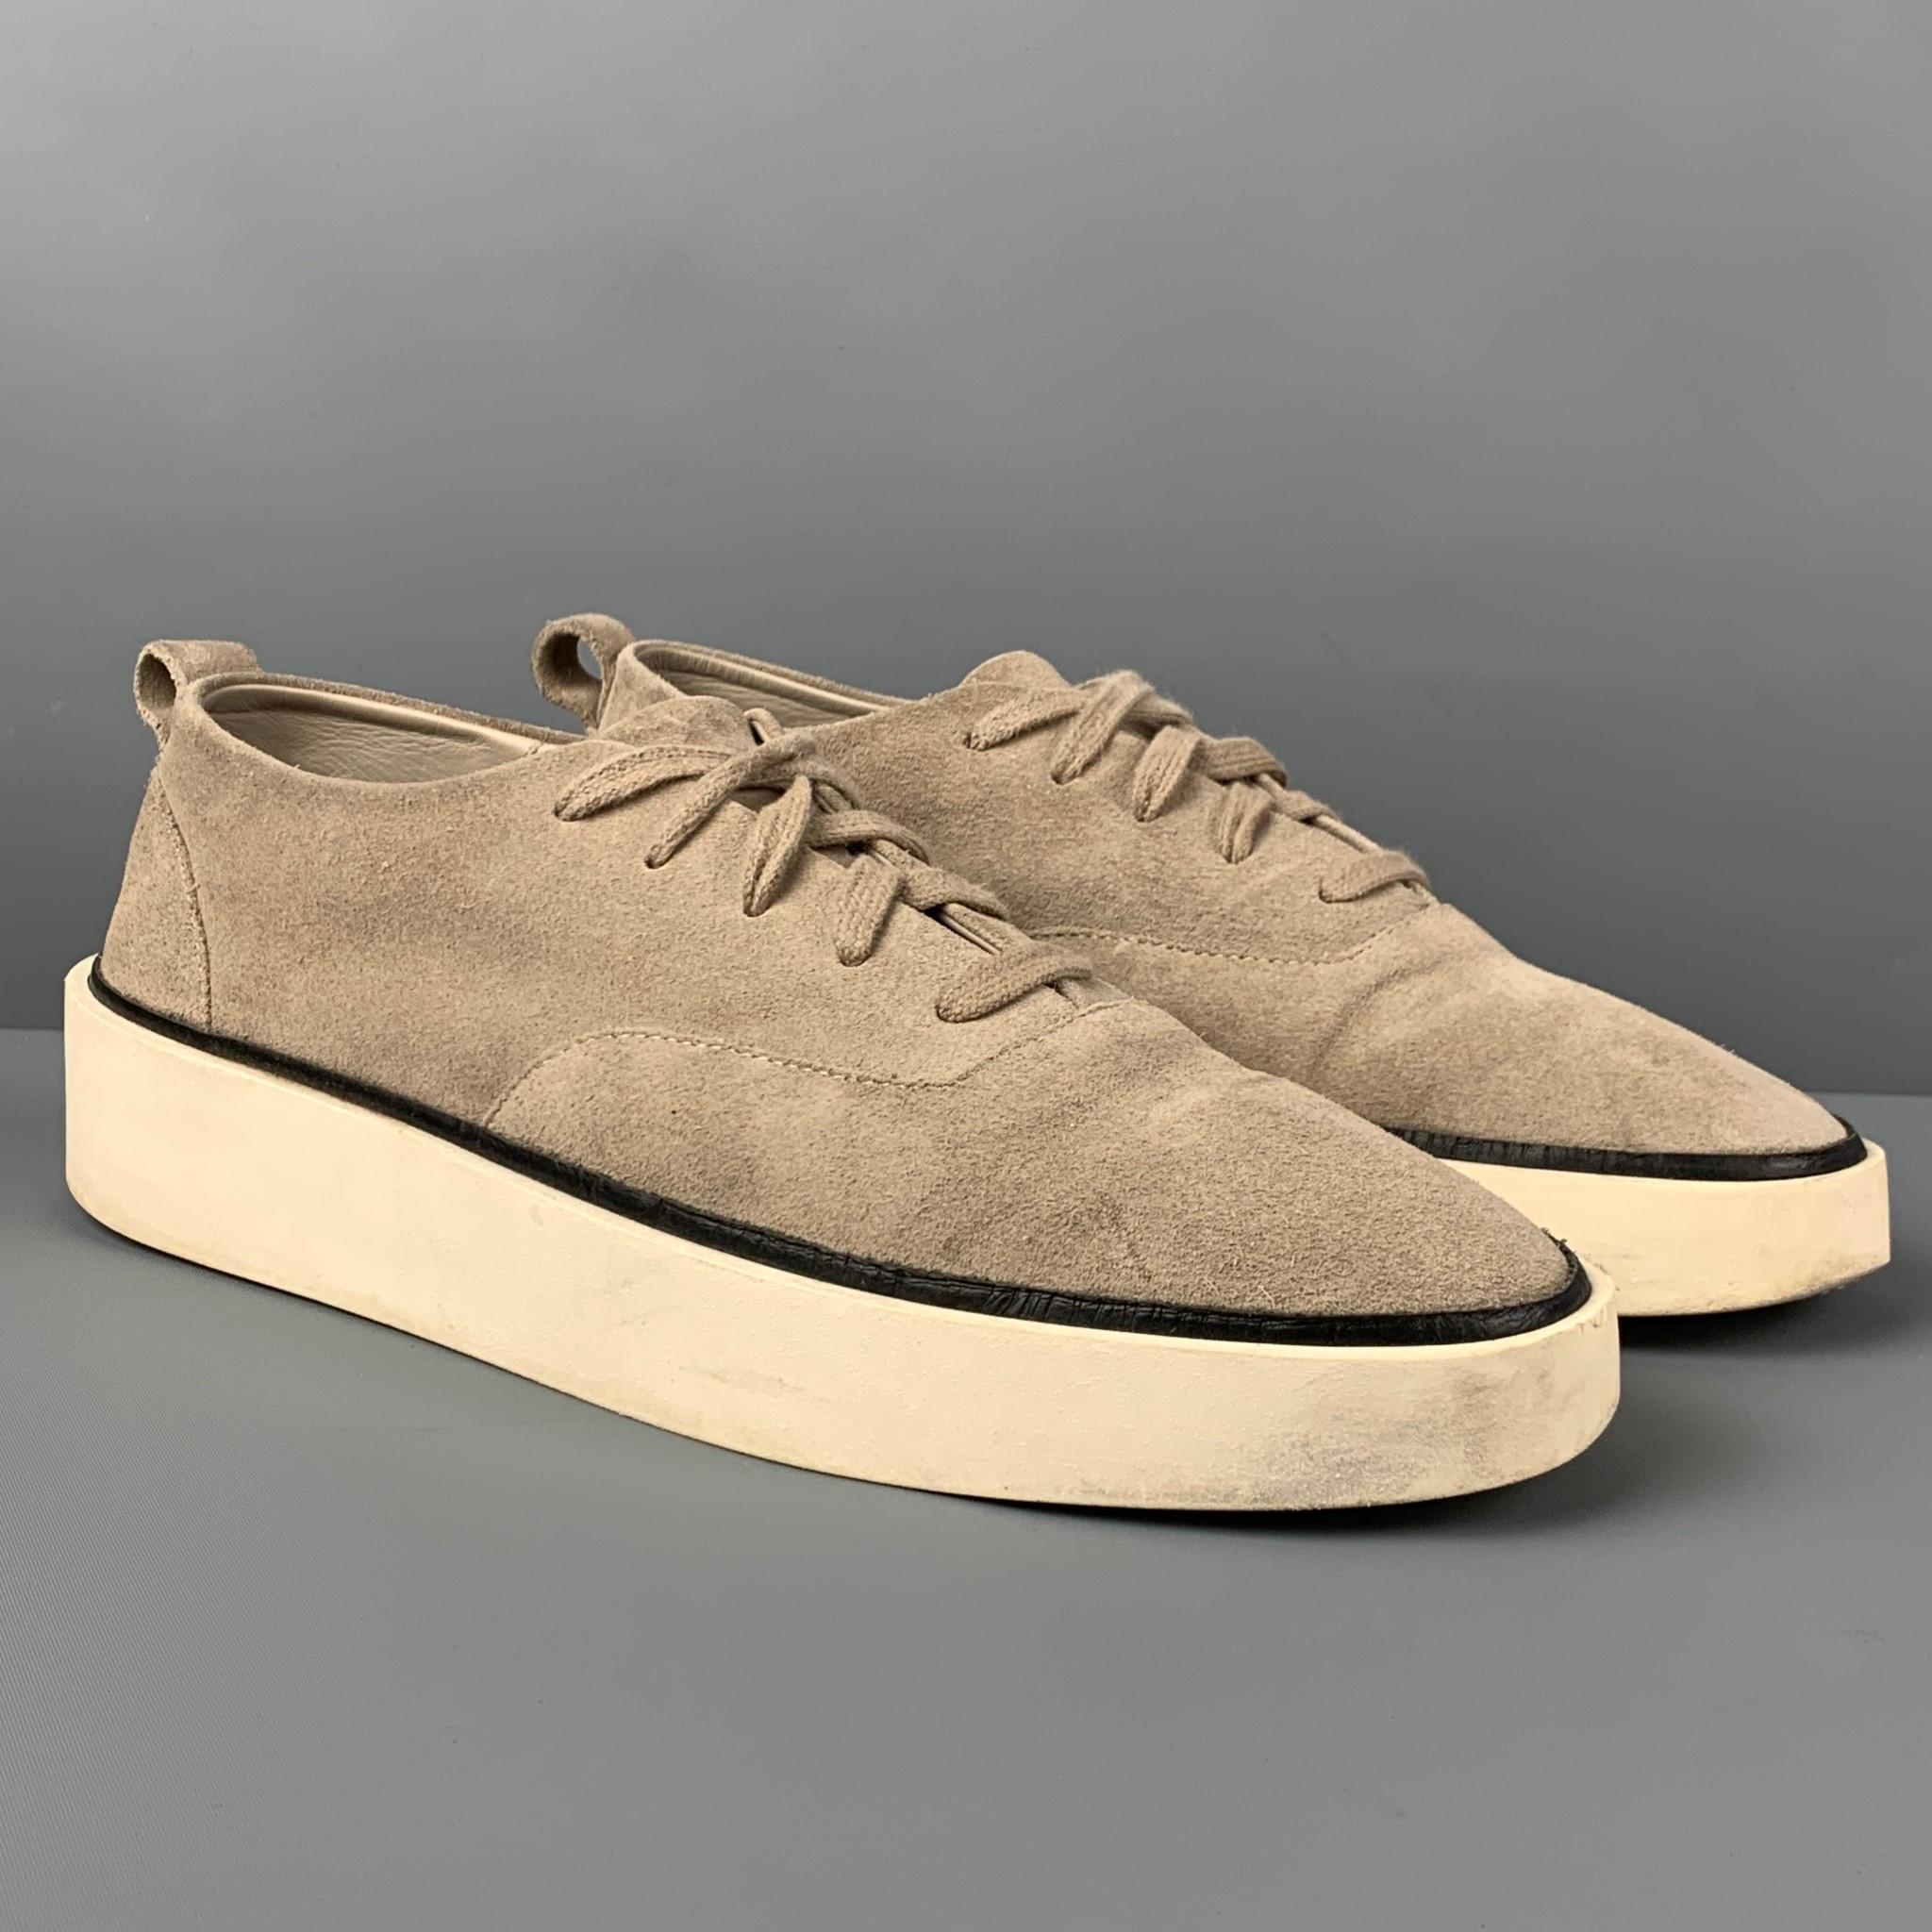 FEAR OF GOD sneakers comes in a light grey textured suede featuring a low-top style, black trim, and a lace up closure. Made in Italy. 

Good Pre-Owned Condition.
Marked: 44

Outsole: 12 in. x 4 in.  